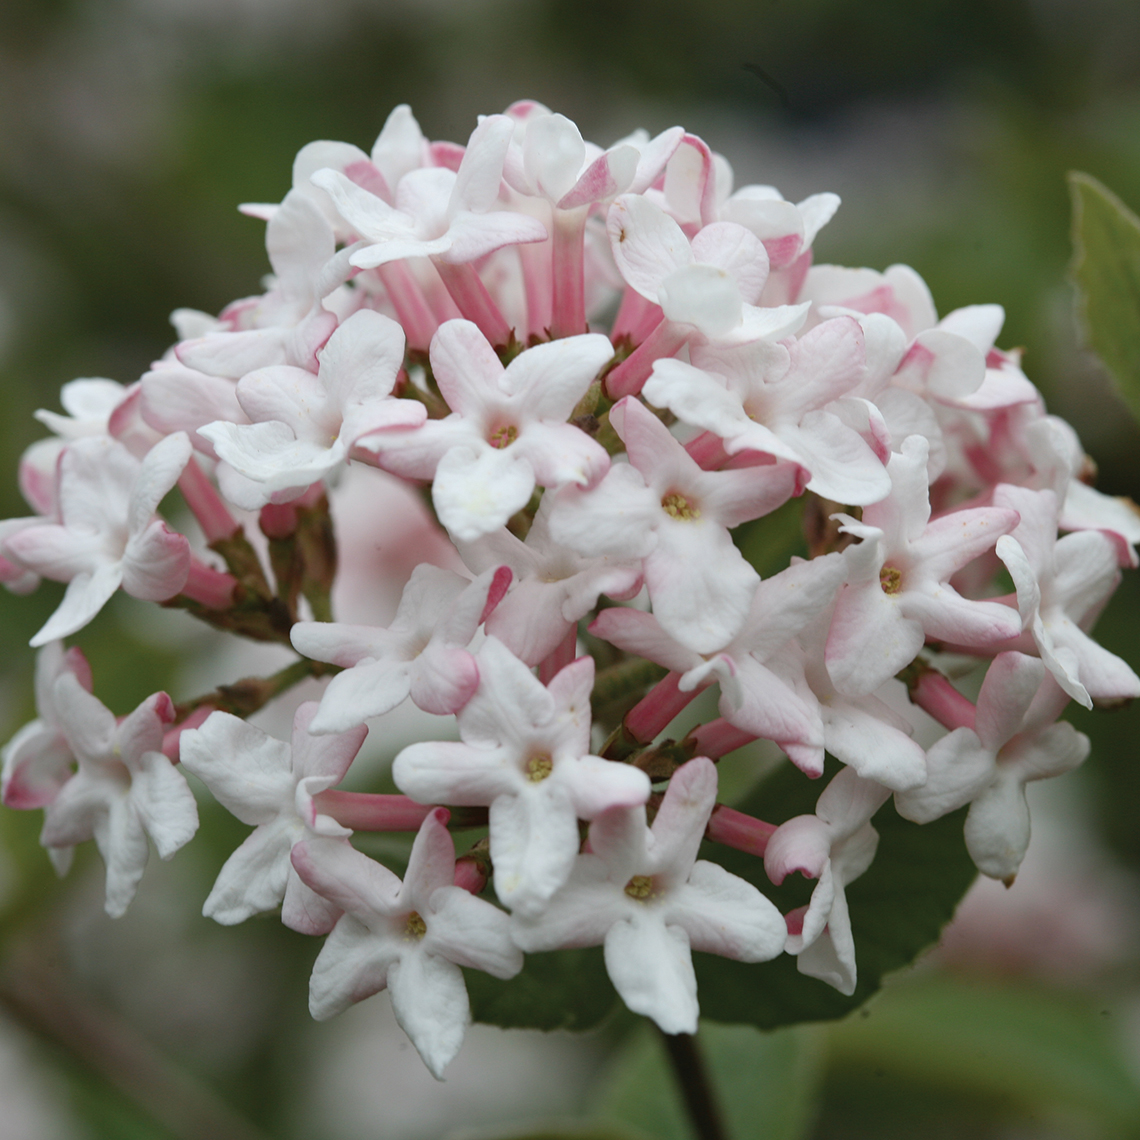 Closeup of the white and pink flowers of Spice Girl Koreanspice viburnum